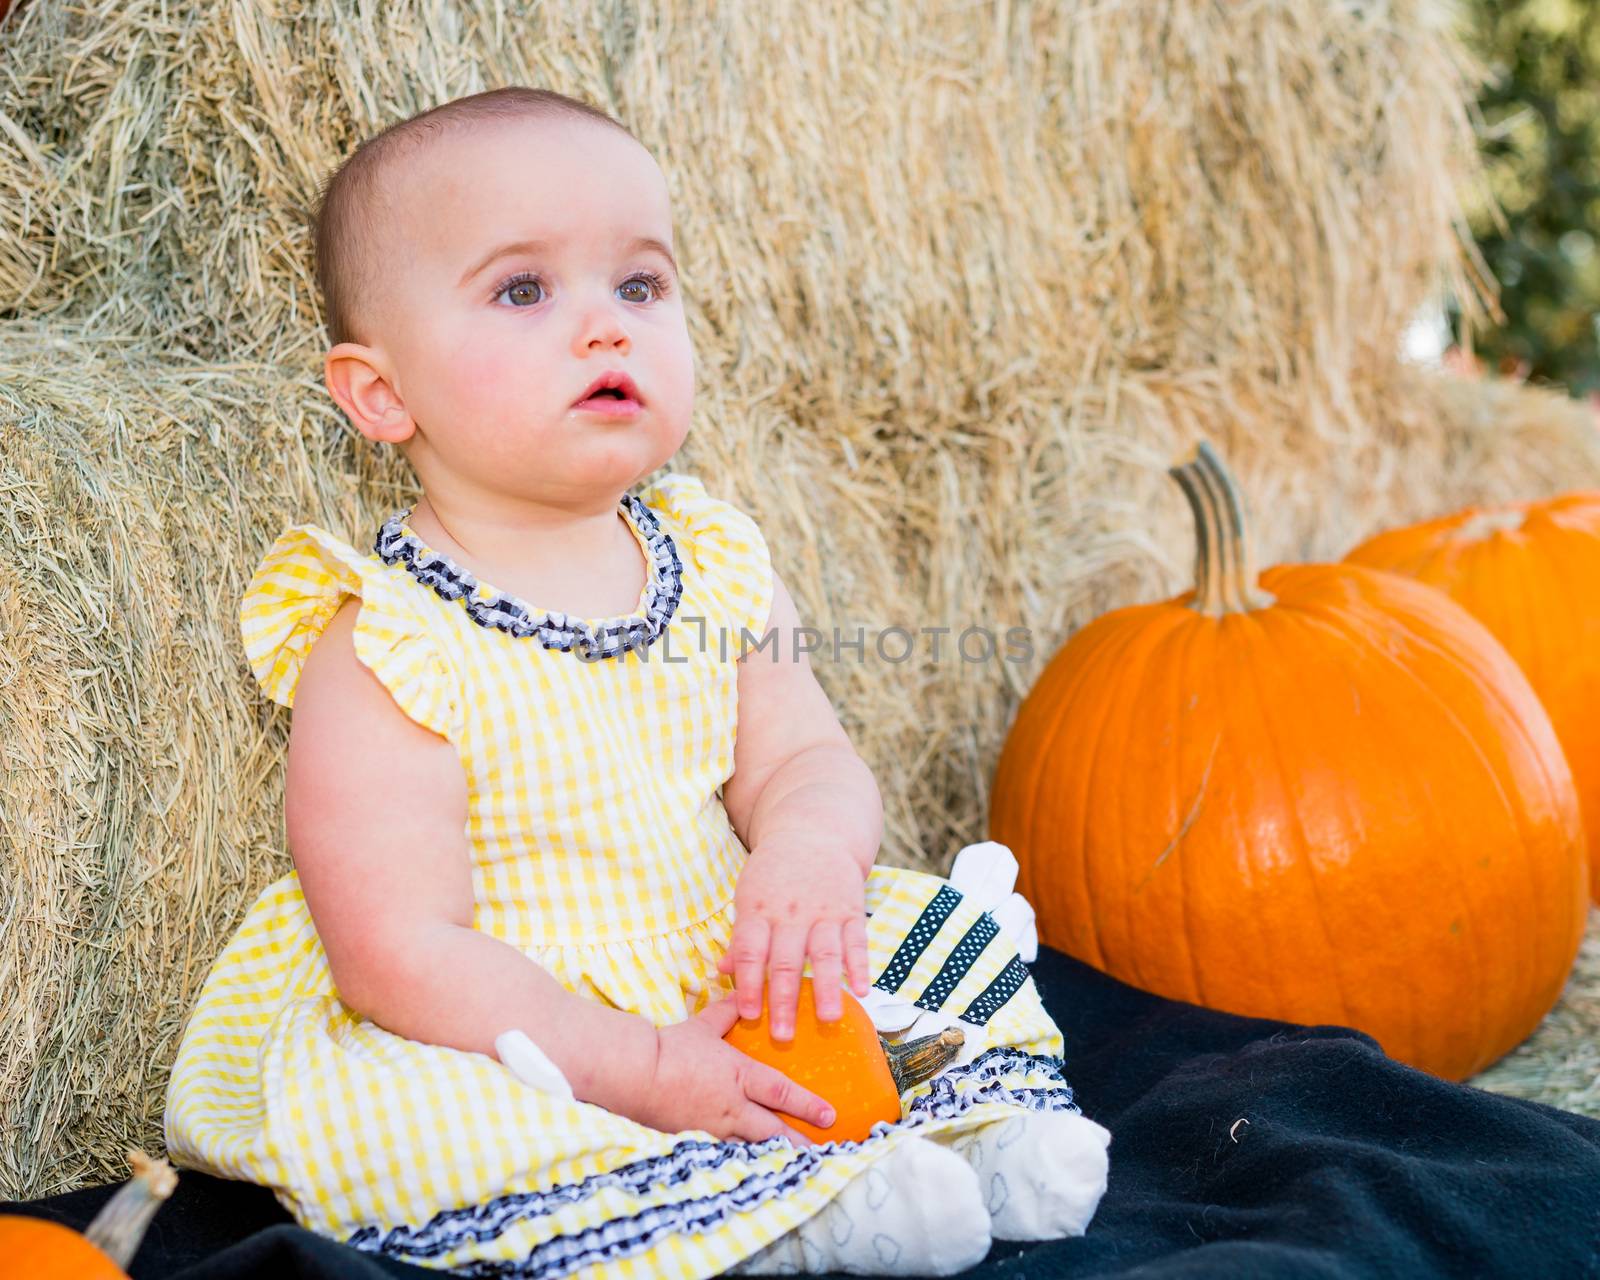 Adorable Baby in Autumn sitting by pumpkins and hay